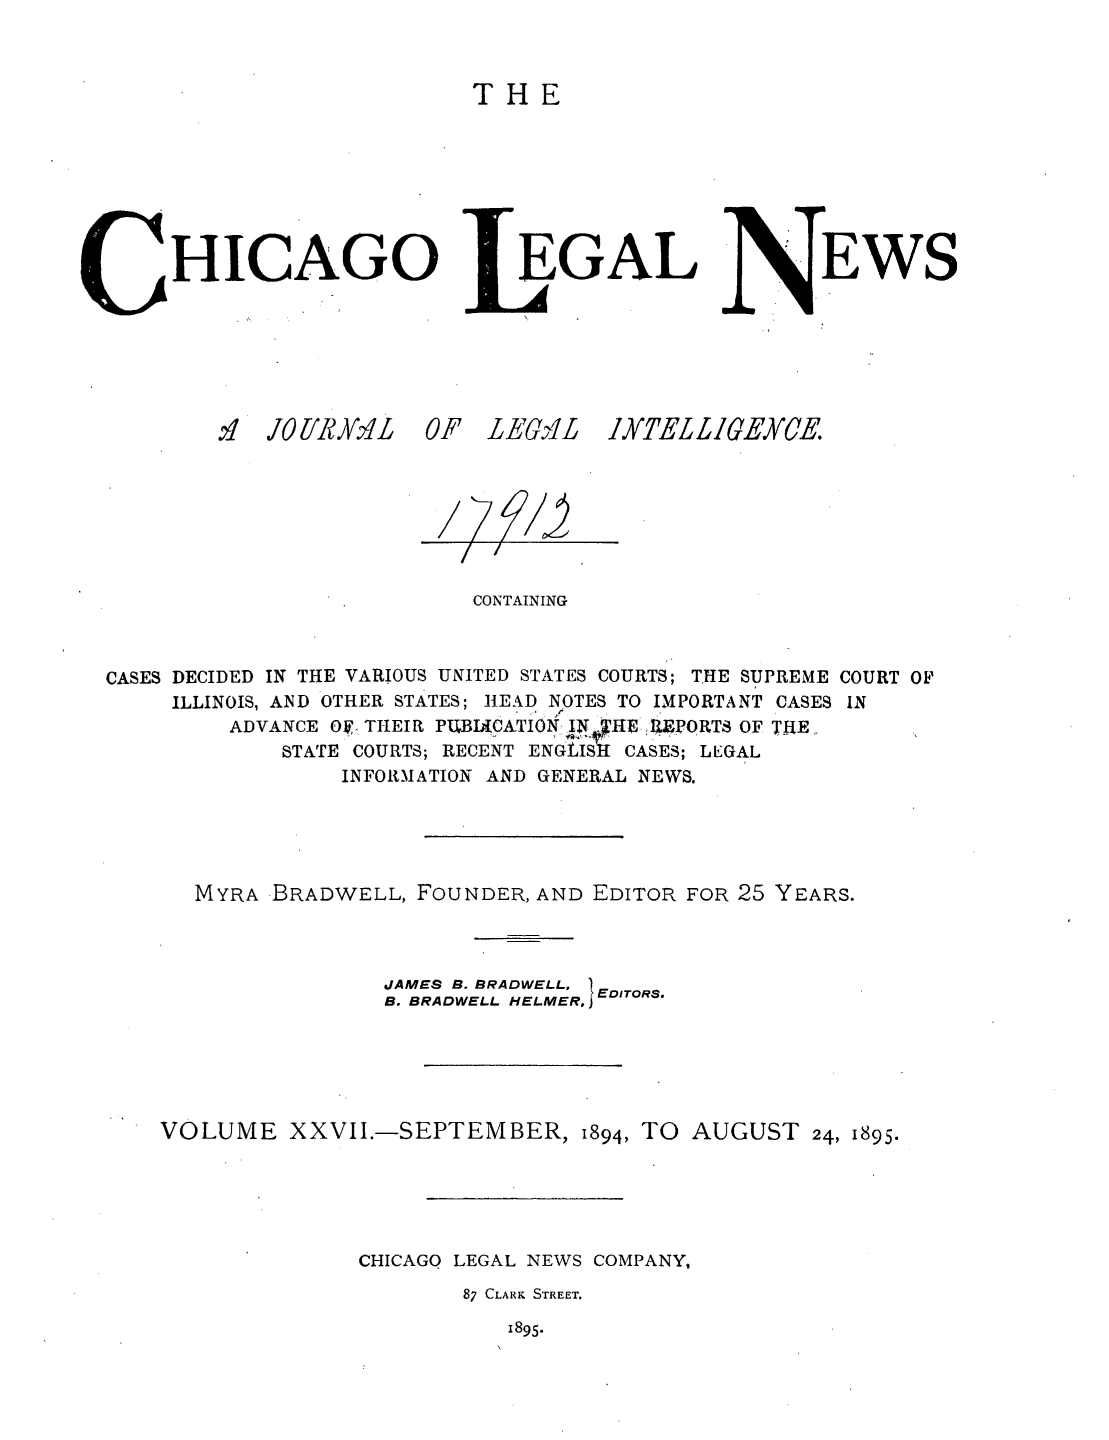 handle is hein.journals/chiclene27 and id is 1 raw text is: THE

HICAGO
i4 JO[R YM1L  0

EGAL

F LEGO-li

EWS

CONTAINING
CASES DECIDED IN THE VARIOUS UNITED STATES COURTS; THE SUPREME COURT OF
ILLINOIS, AND OTHER STATES; HEAD NOTES TO IMPORTANT CASES IN
ADVANCE O1. THEIR PUBLWATION   1PORTS OF TIE
STATE COURTS; RECENT ENGLISH CASES; LEGAL
INFORMATION AND GENERAL NEWS.
MYRA BRADWELL, FOUNDER, AND EDITOR FOR 25 YEARS.
JAMES B. BRADWELL,  E
B. BRADWELL HELMER, EoITORS.
VOLUME XXVII.-SEPTEMBER, 1894, TO AUGUST 24, 1895.
CHICAGO LEGAL NEWS COMPANY,
87 CLARK STREET.

1895.

1XTE £ GEYCE

/ 7


